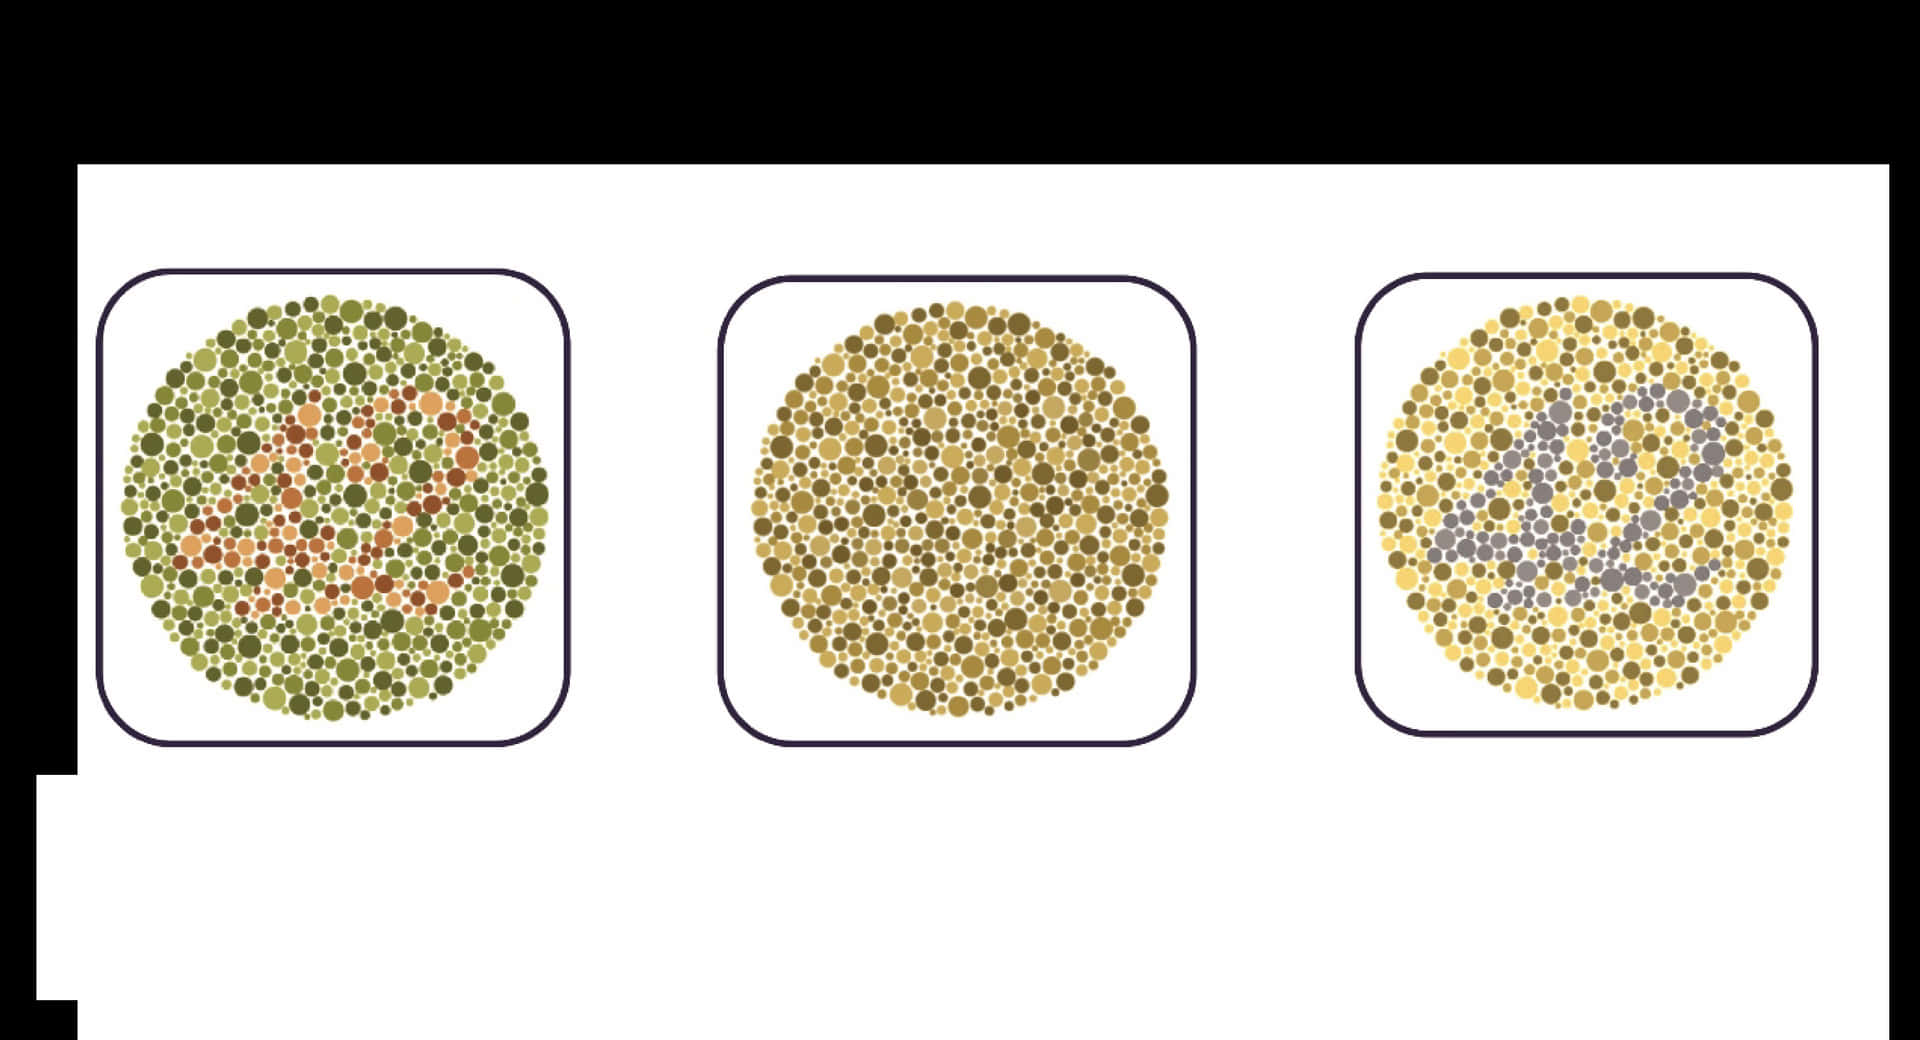 Four Different Types Of Seeds In Different Colors